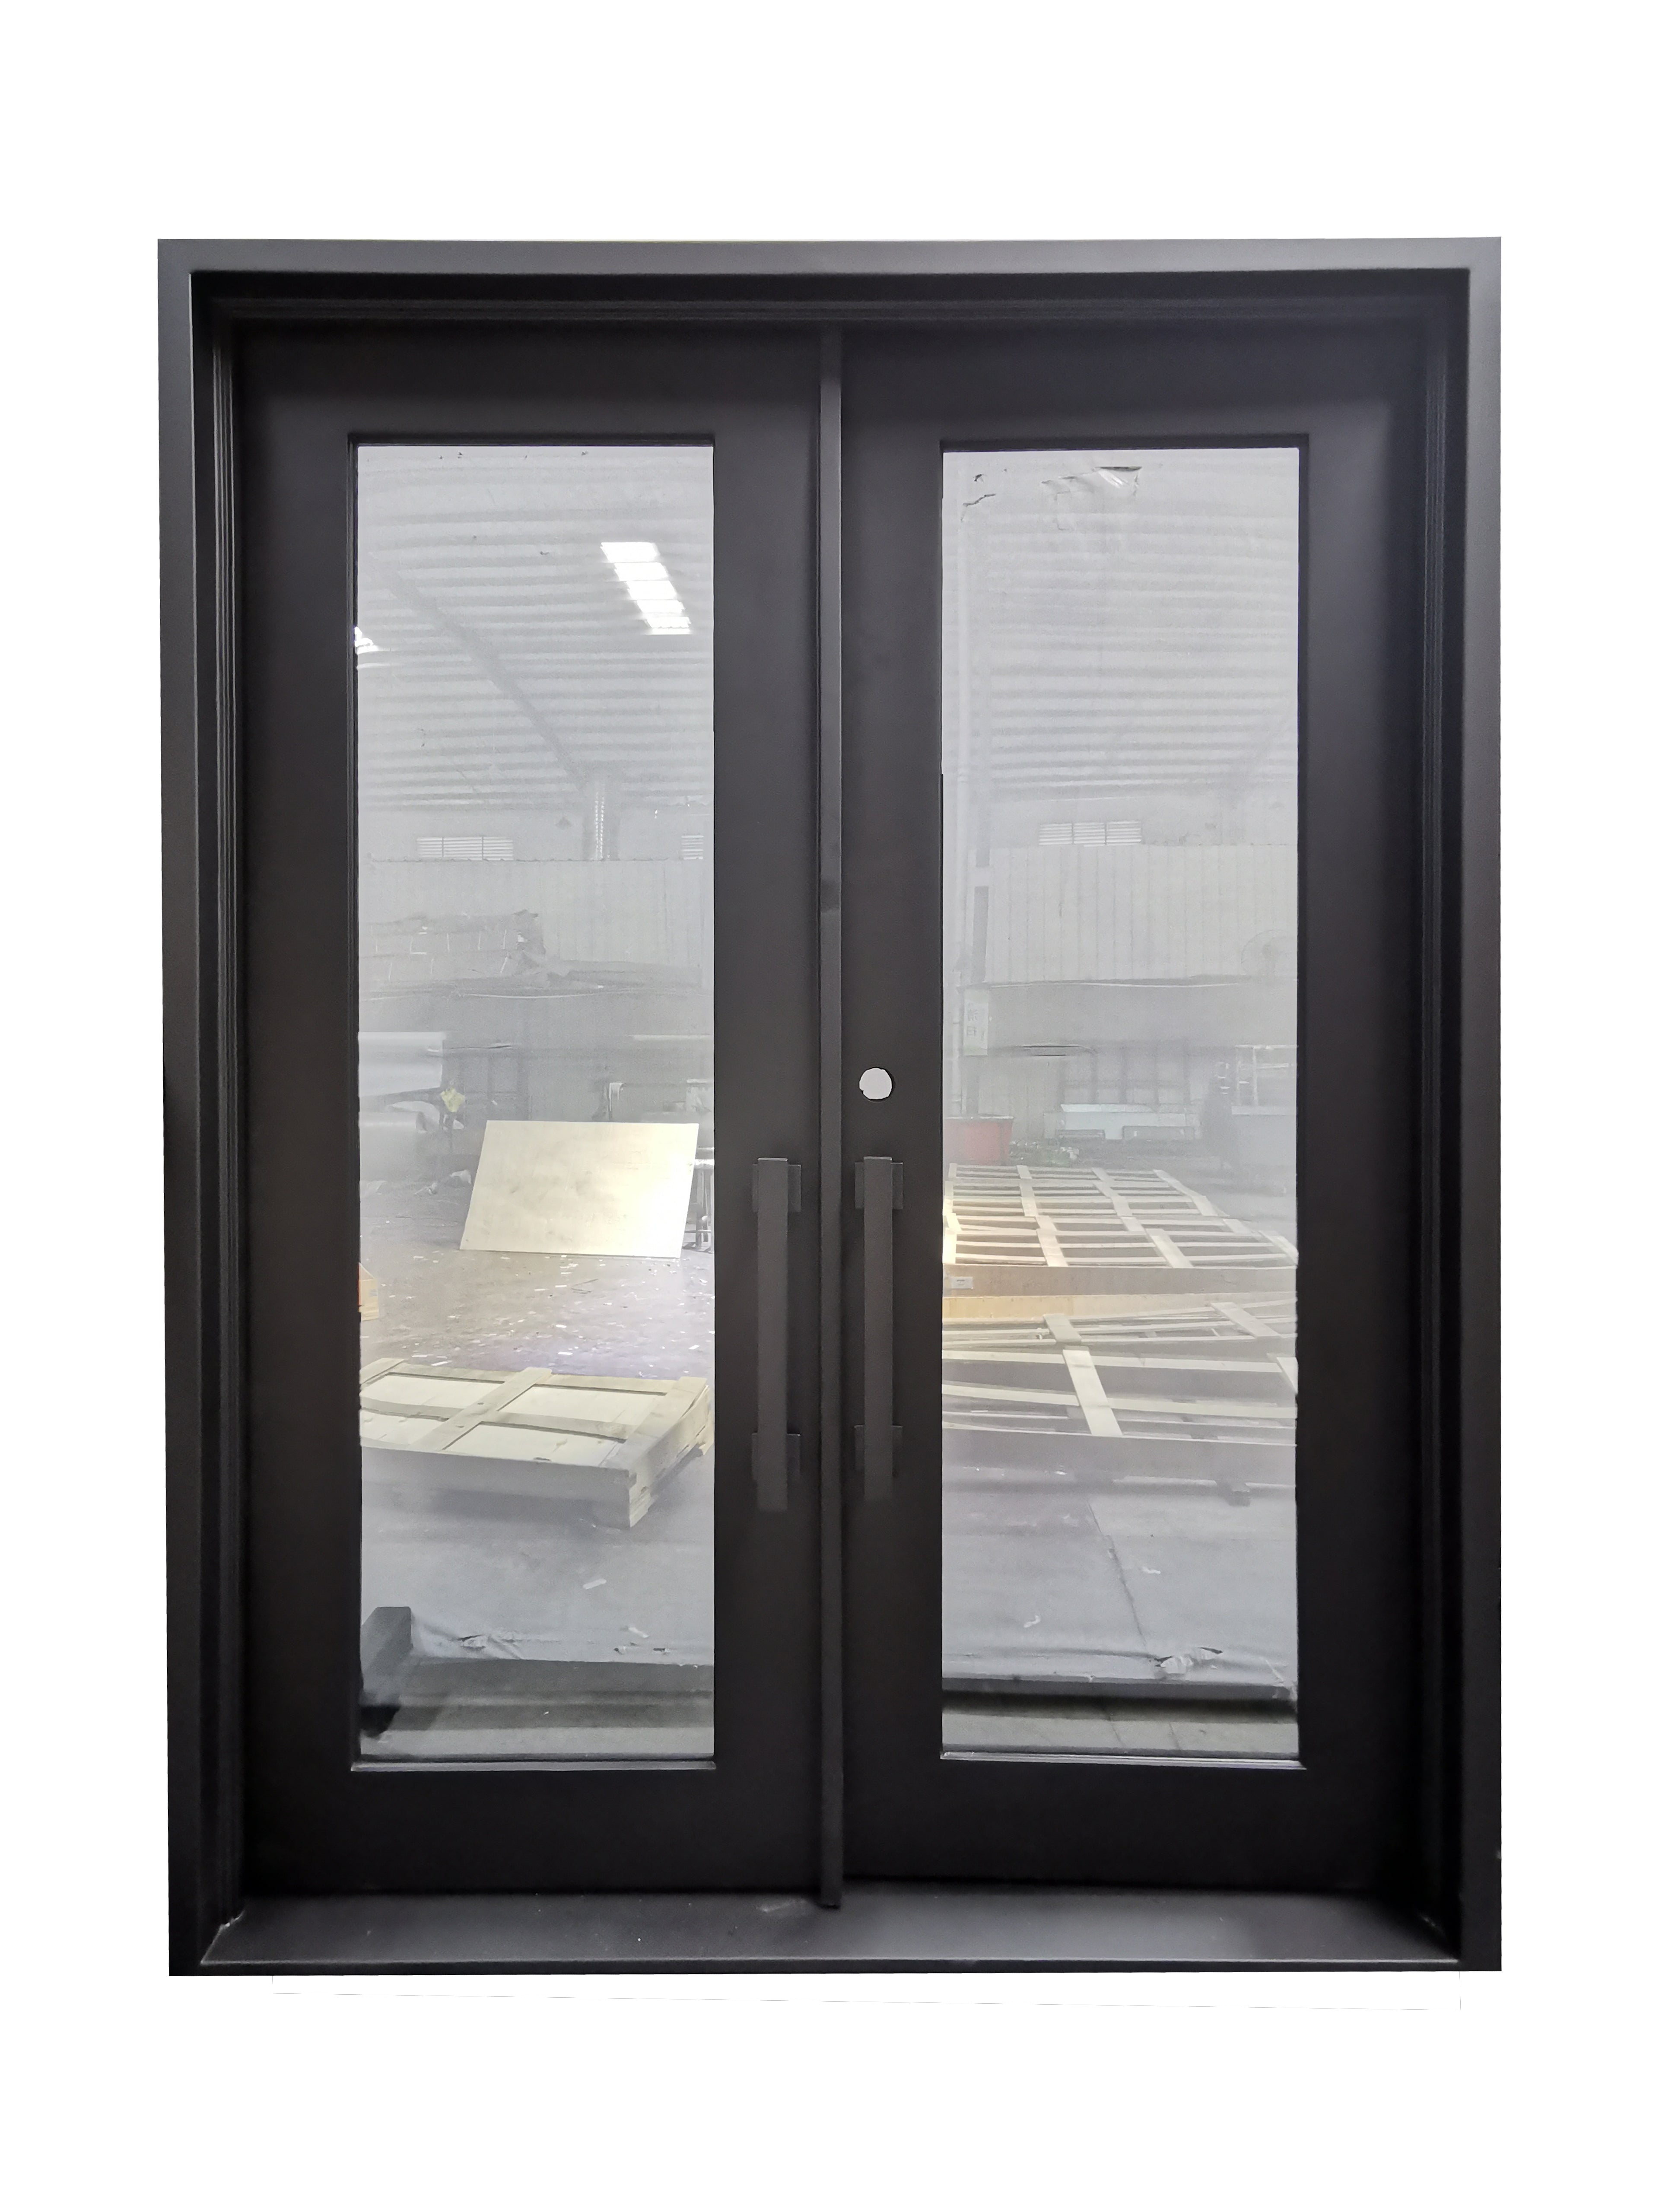 Acton Model Double Front Entry Iron Door With Tempered Clear Low E Glass Matt Black Finish